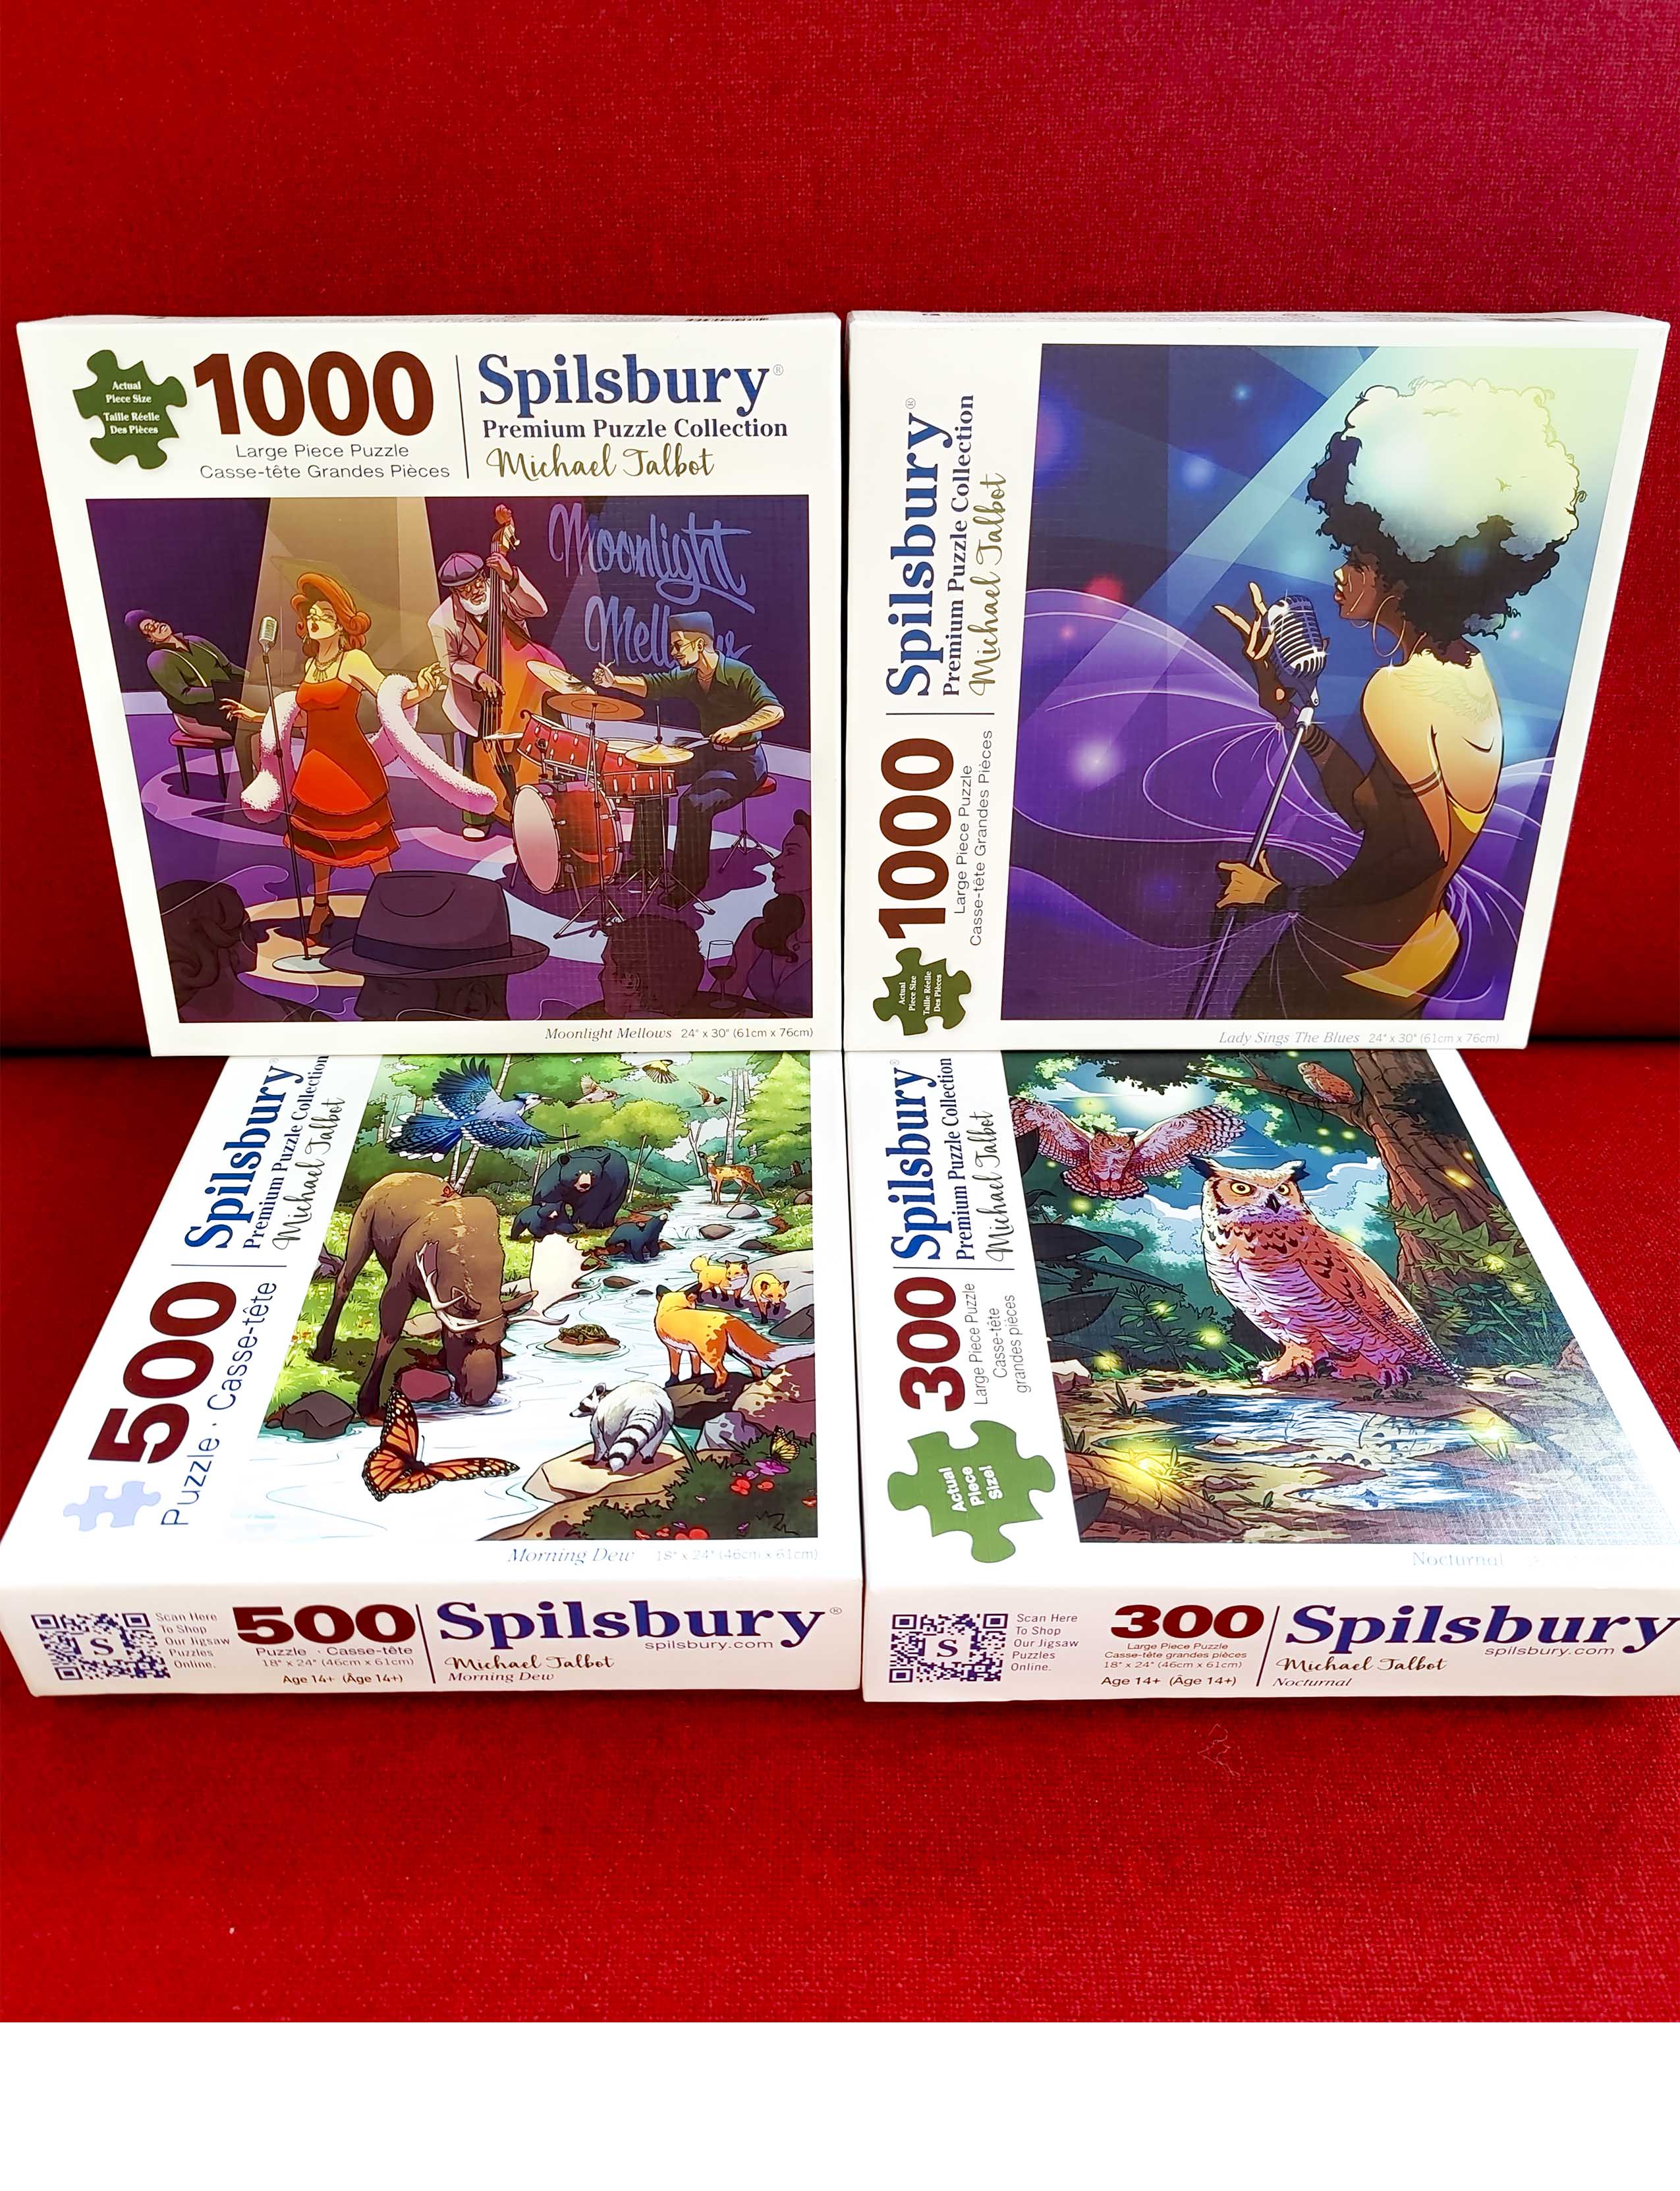 Collection of 4 Spilsbury puzzles